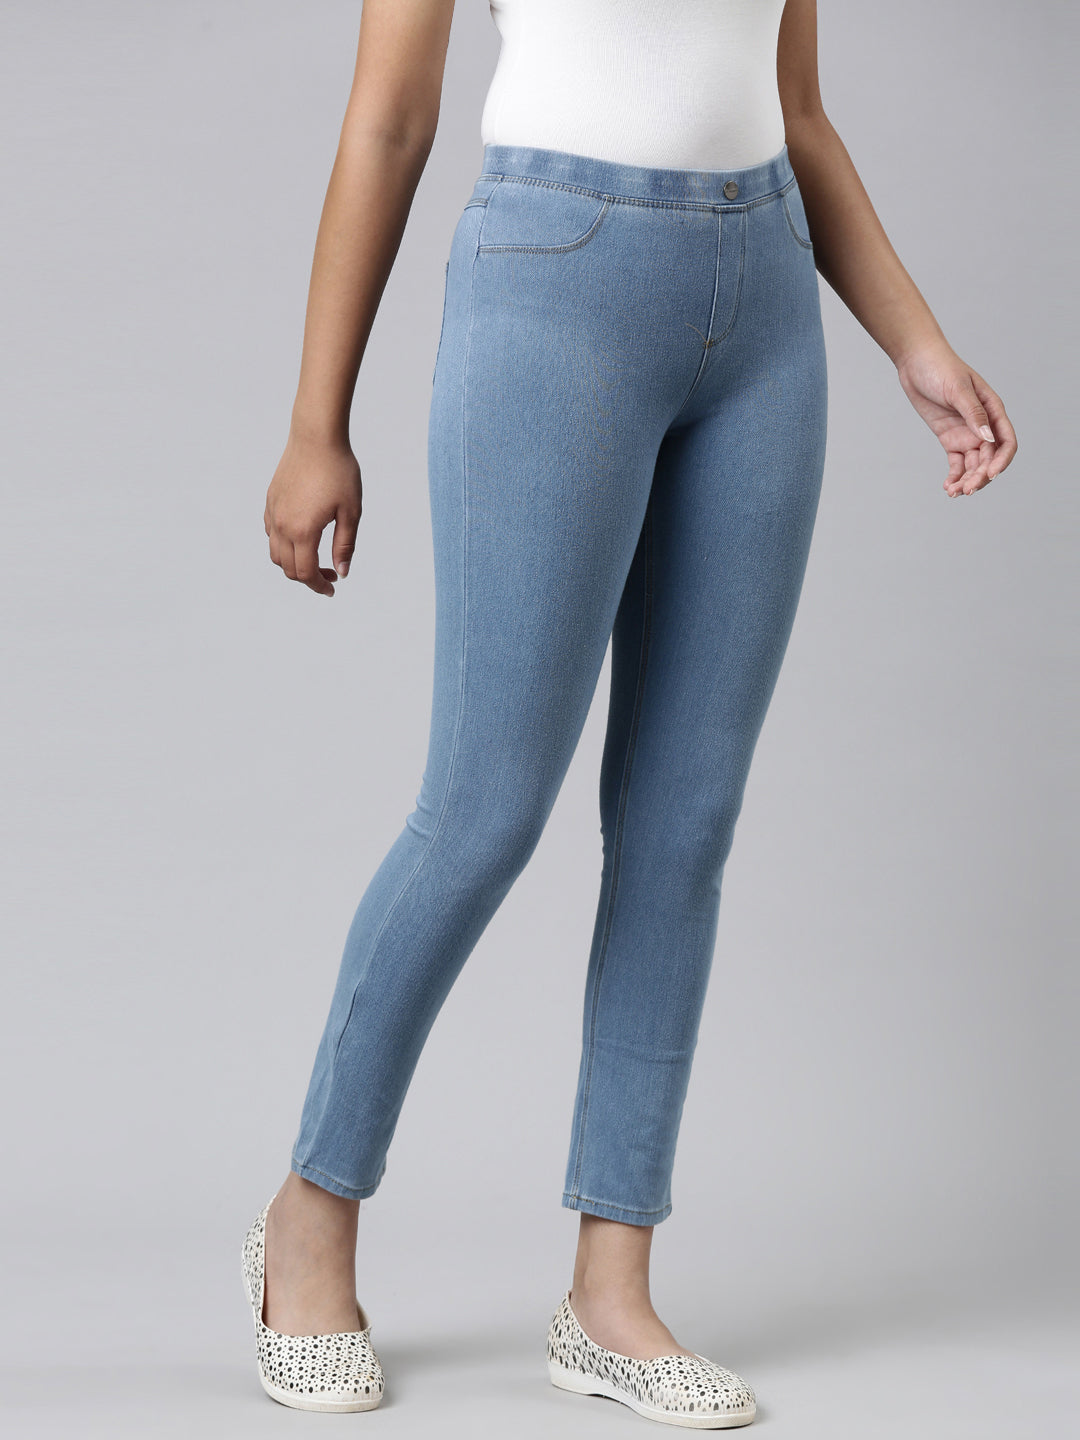 Go Colors Blue Denim Stretch Pants XL Buy Go Colors Blue Denim Stretch  Pants XL Online at Best Price in India  Nykaa